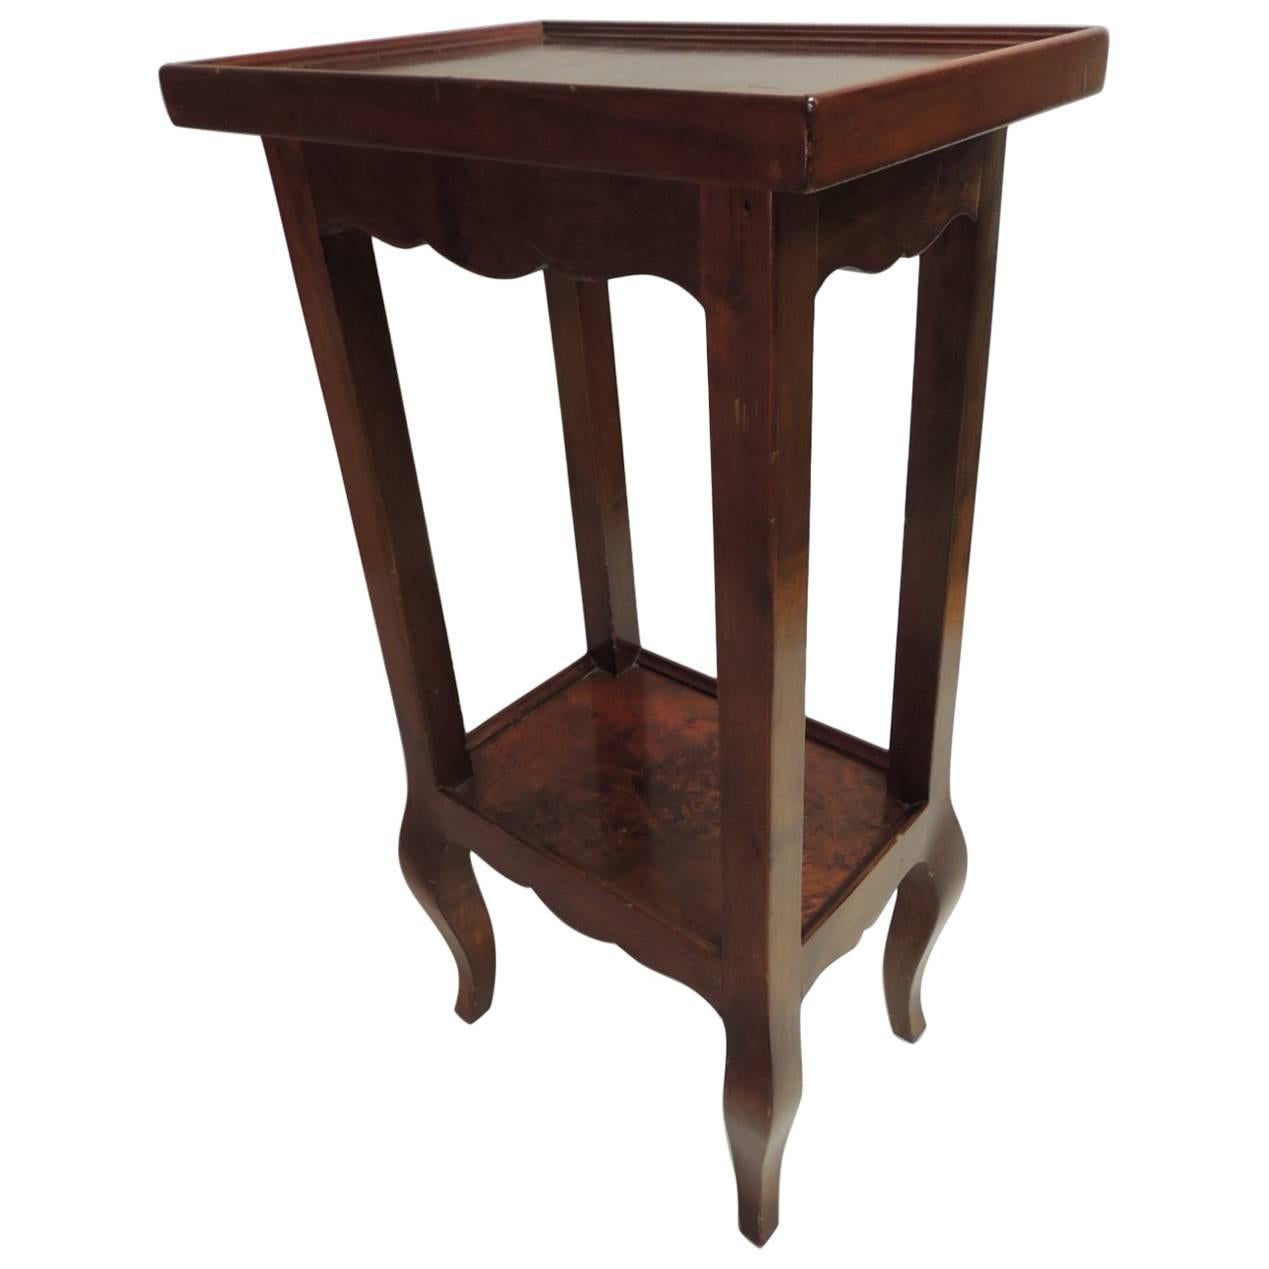 CLOSE OUT SALE: Antique Small Saber Leg Telephone Table